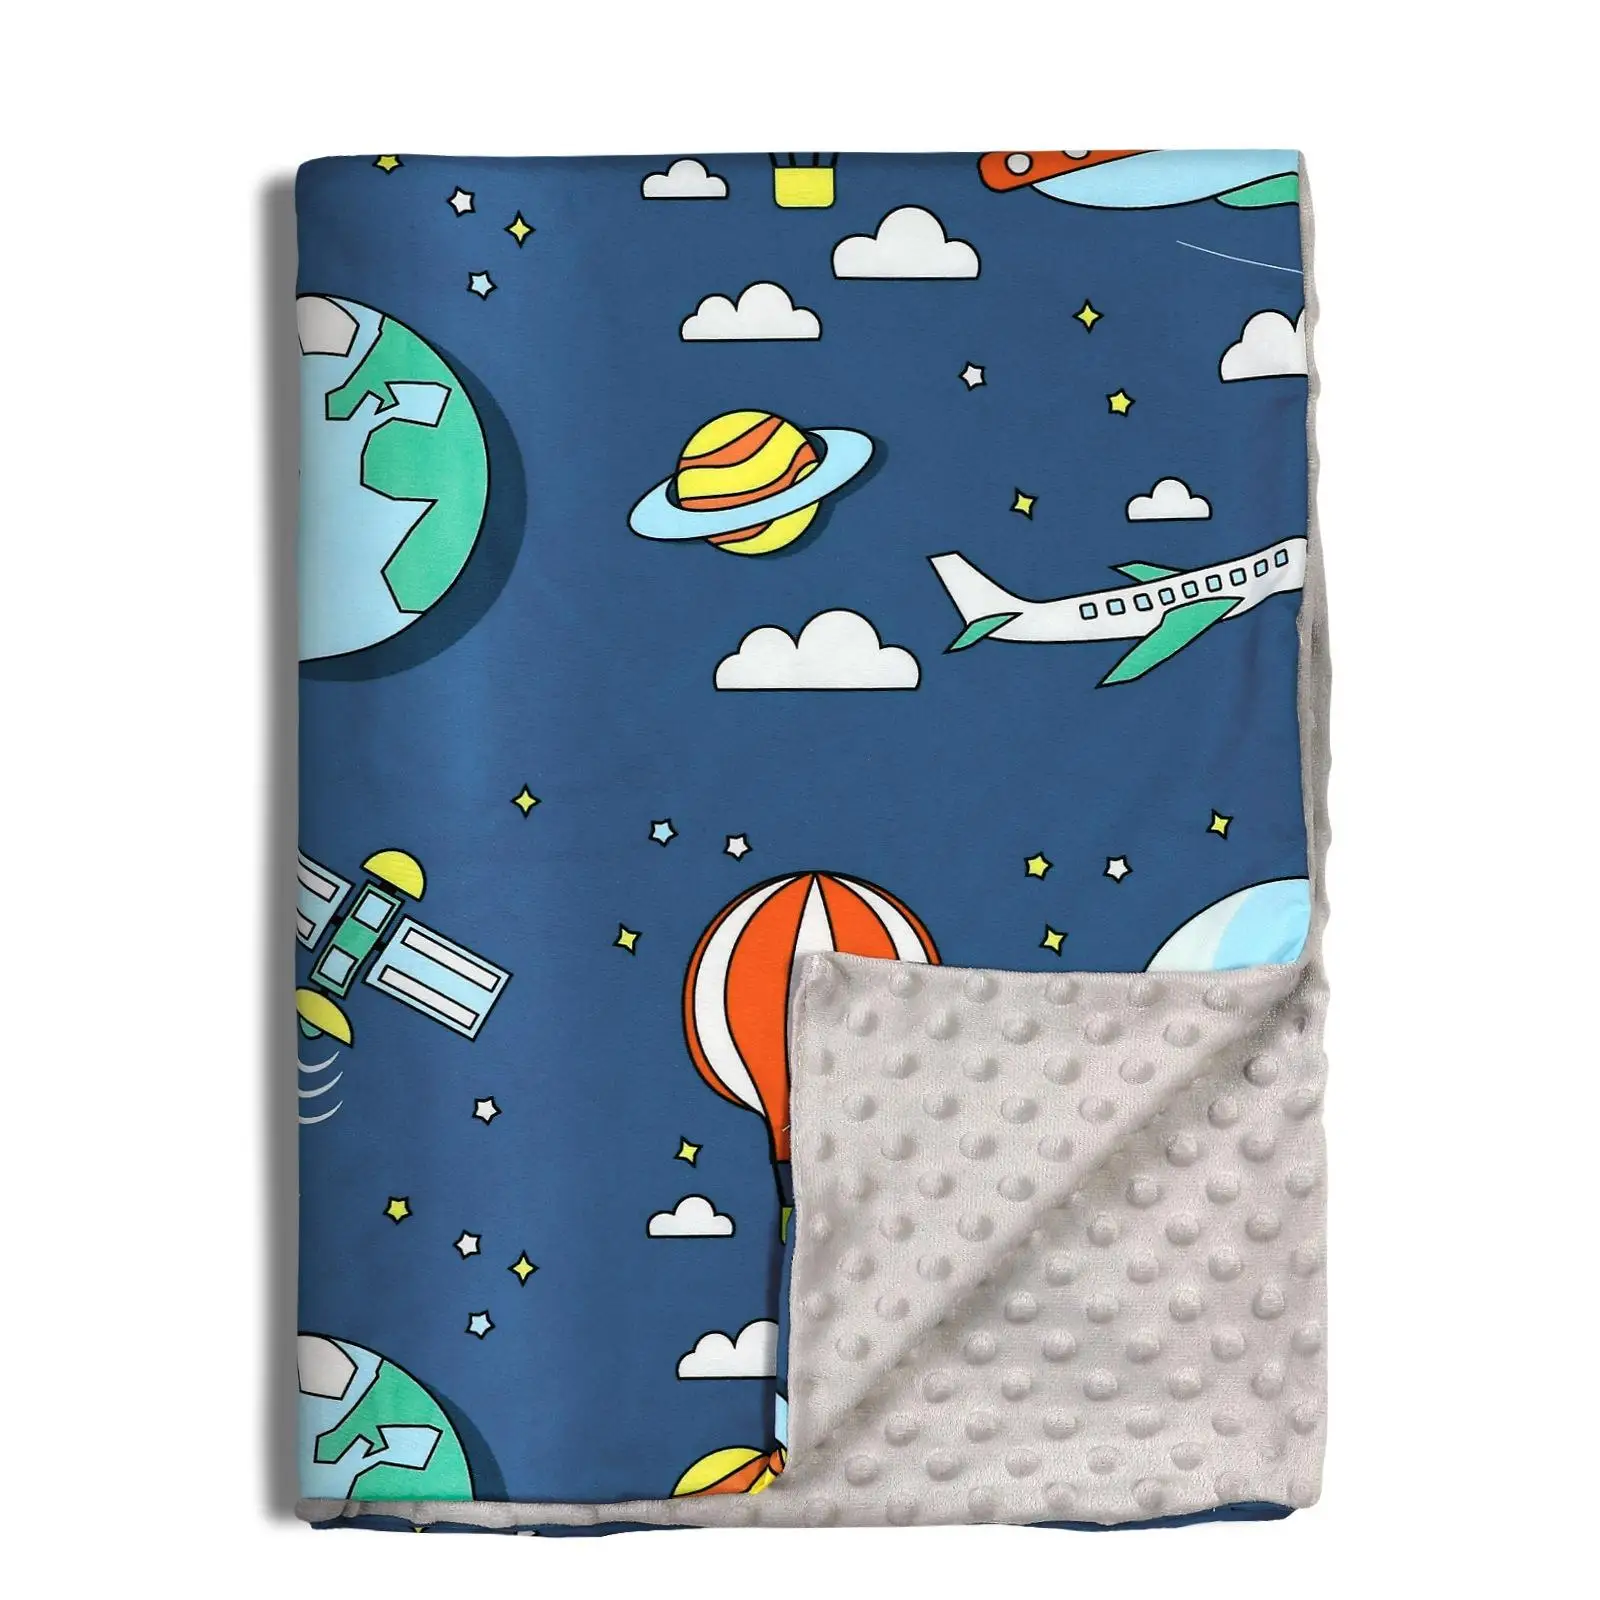 Baby Swaddle Blanket Swaddling Wrap Crib Quilt Toddler Nap Blanket Comfortable Soft Warm for Aircraft Car Boys and Girls Newborn